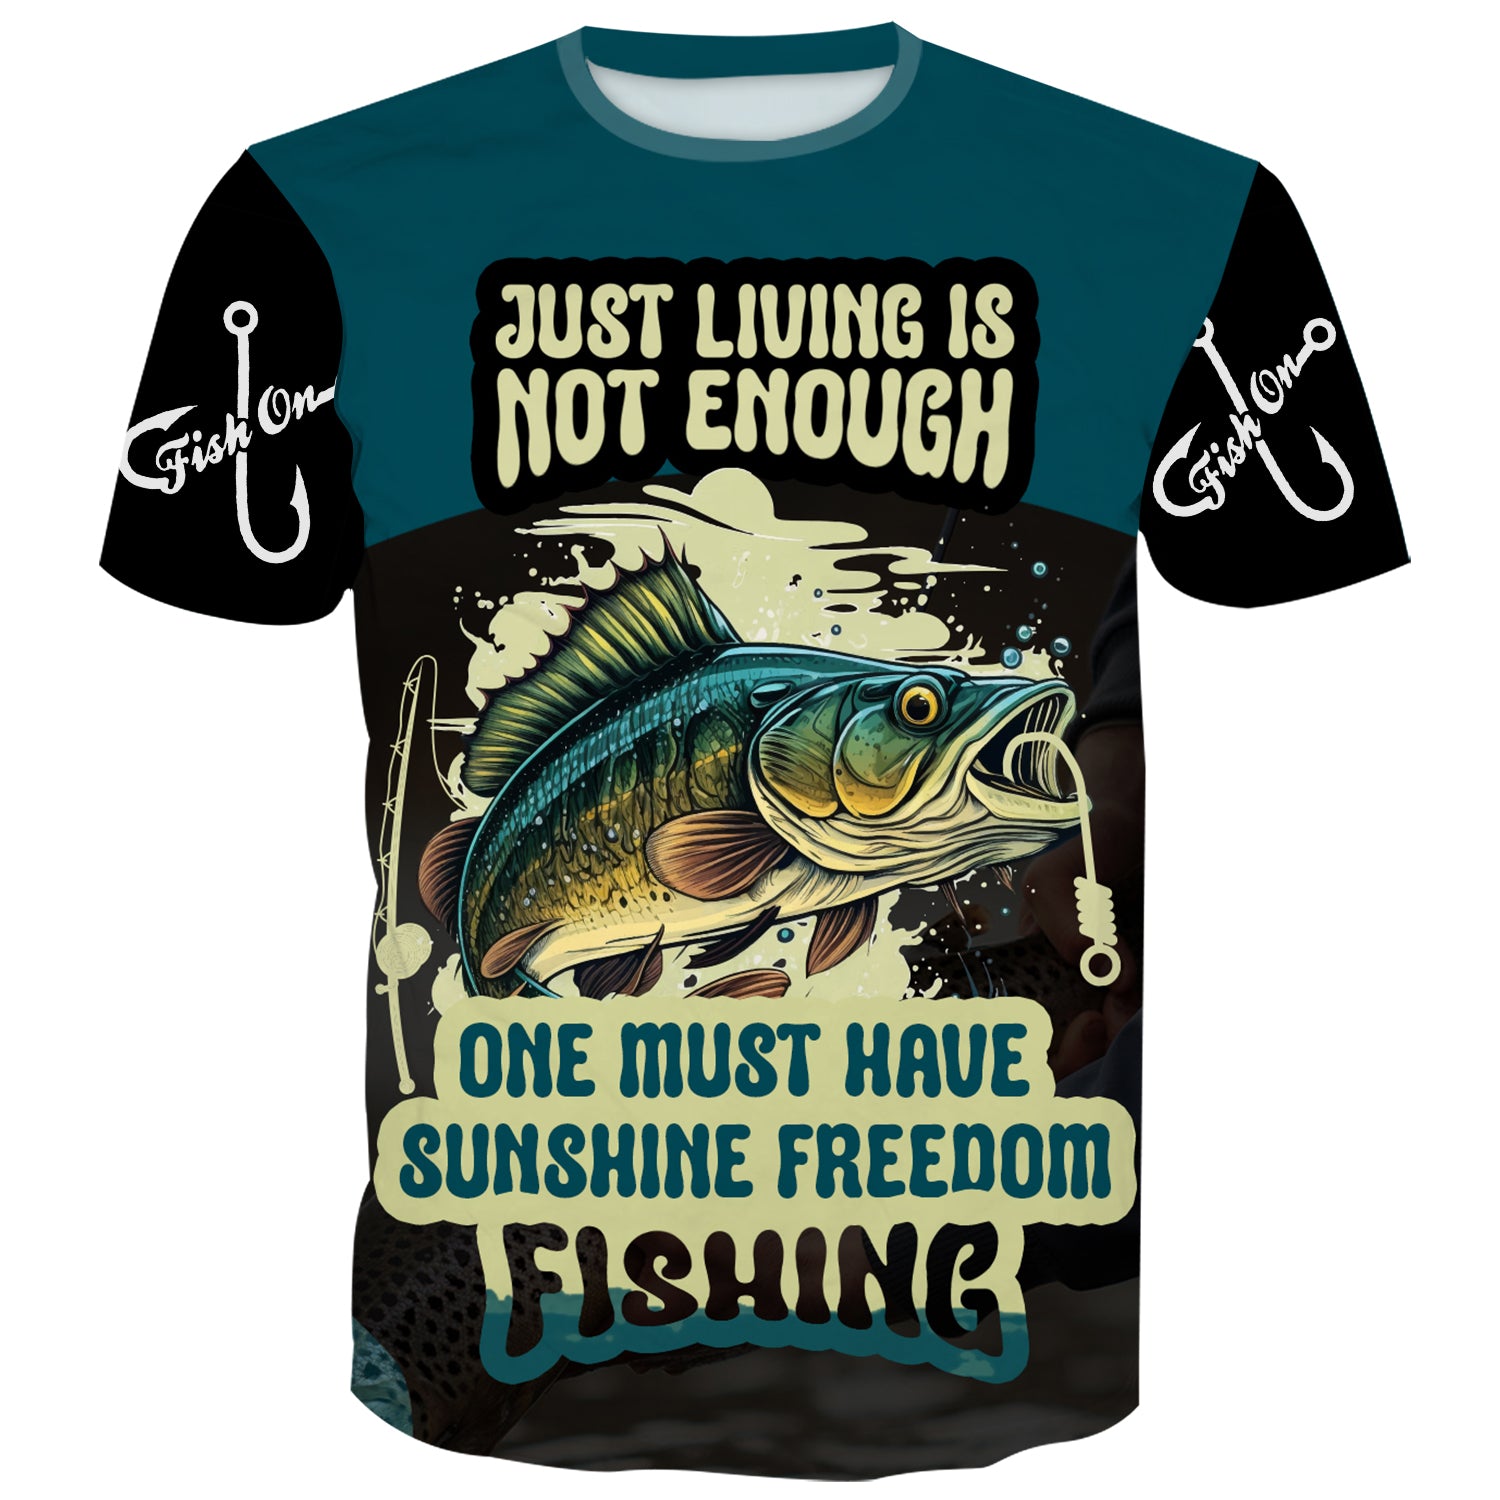 Just living is not enough one must have sunshine freedom - Fishing T-Shirt